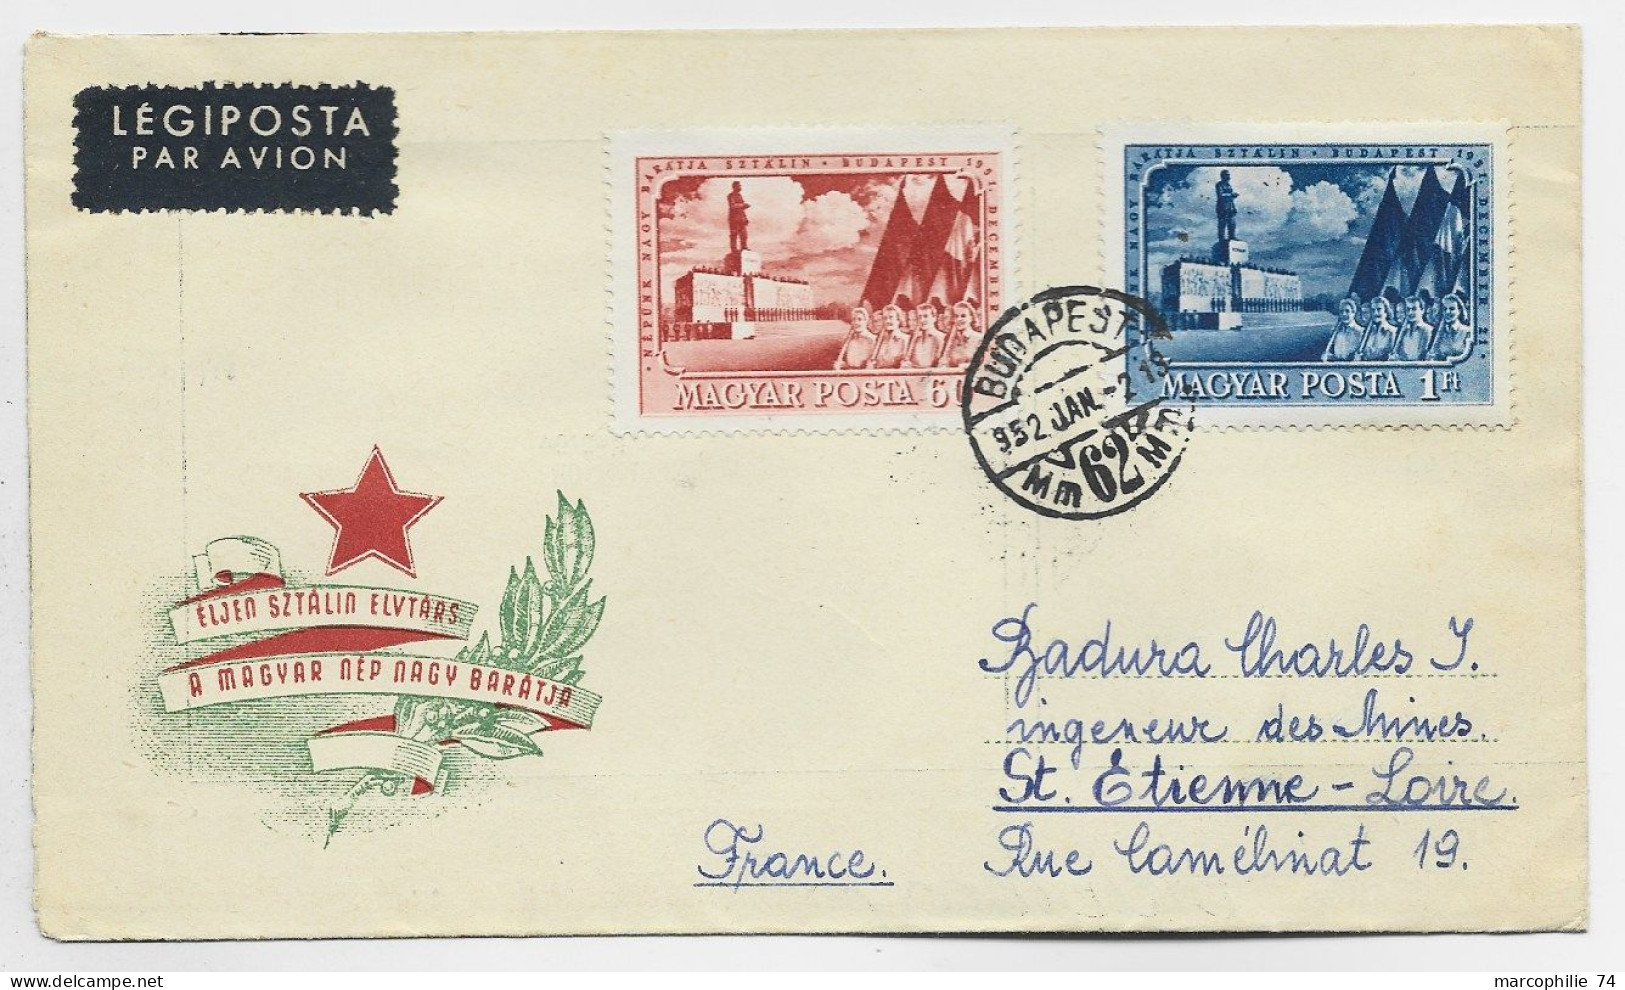 HUNGARY MAGYAR 60F+1FT LETTRE COVER AVION BUDAPEST 2 JANV 1952 TO ST ETIENNE FRANCE - Lettres & Documents